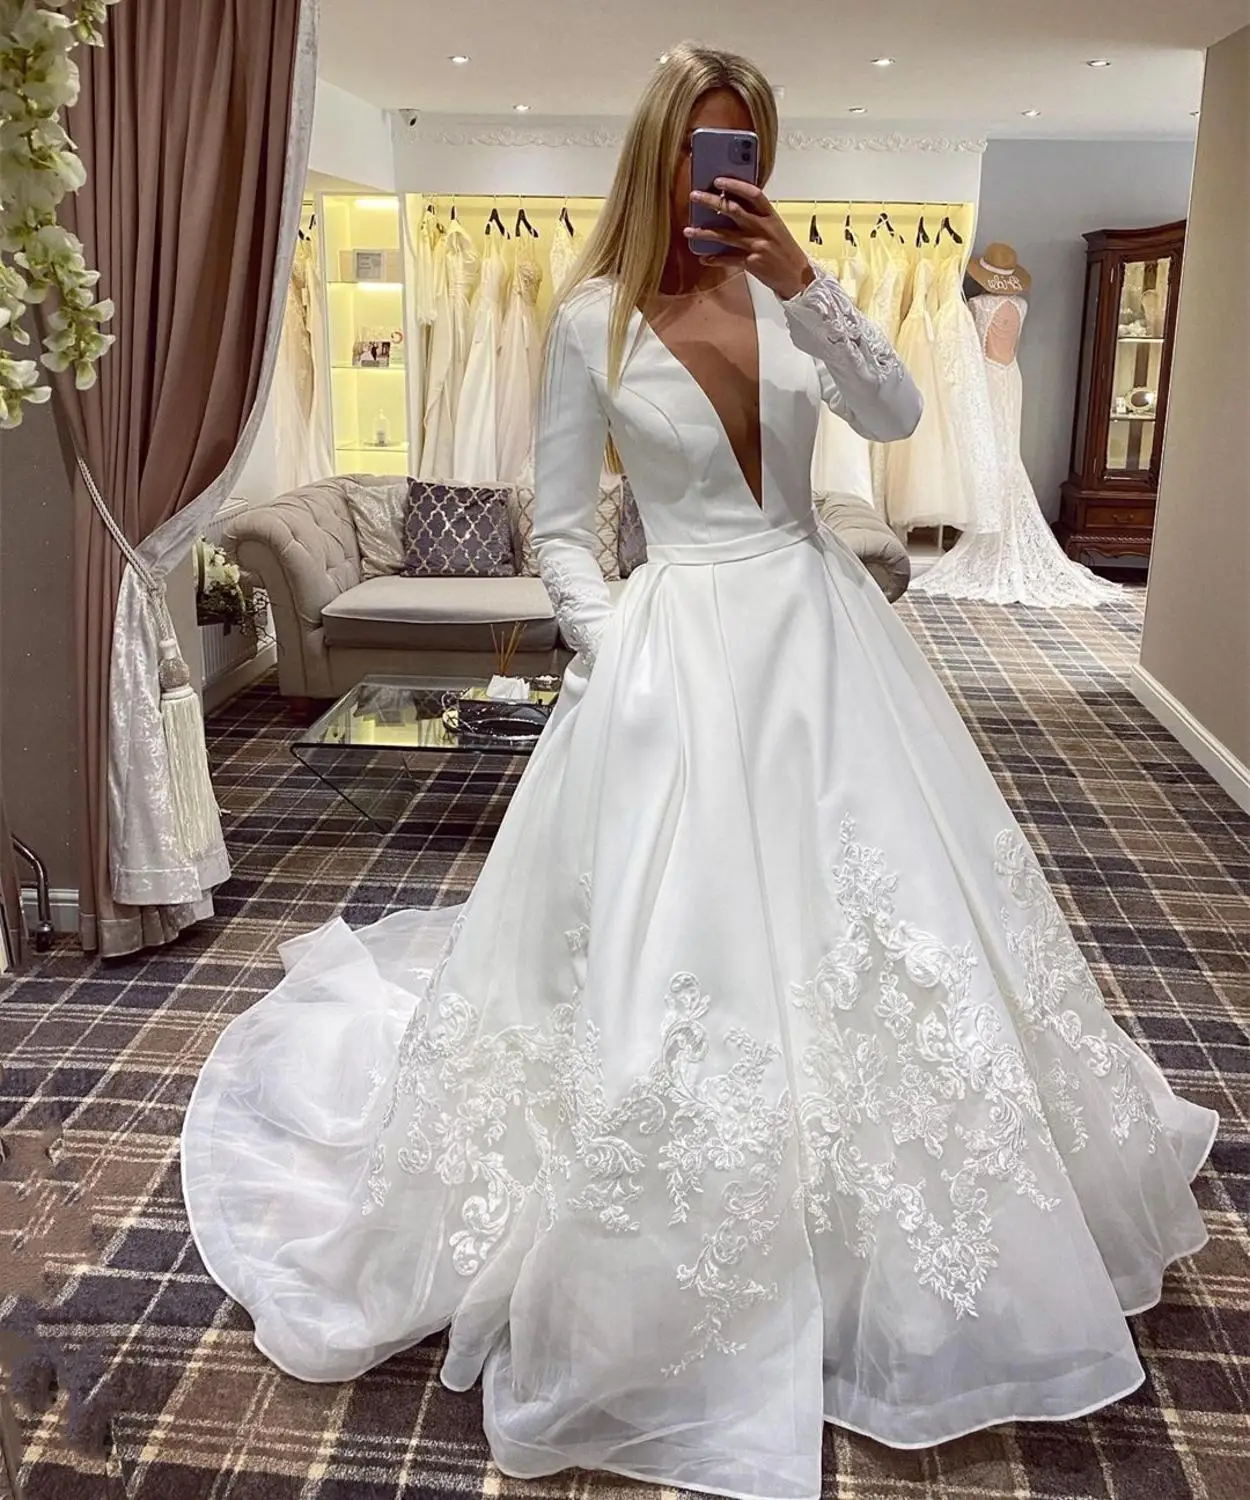 

V-Neck Wedding Dress Long Sleeve Ball Gown Lace Appliques Sweep Train Robe De Mariee Bridal Gown With Pocket Charming Princess